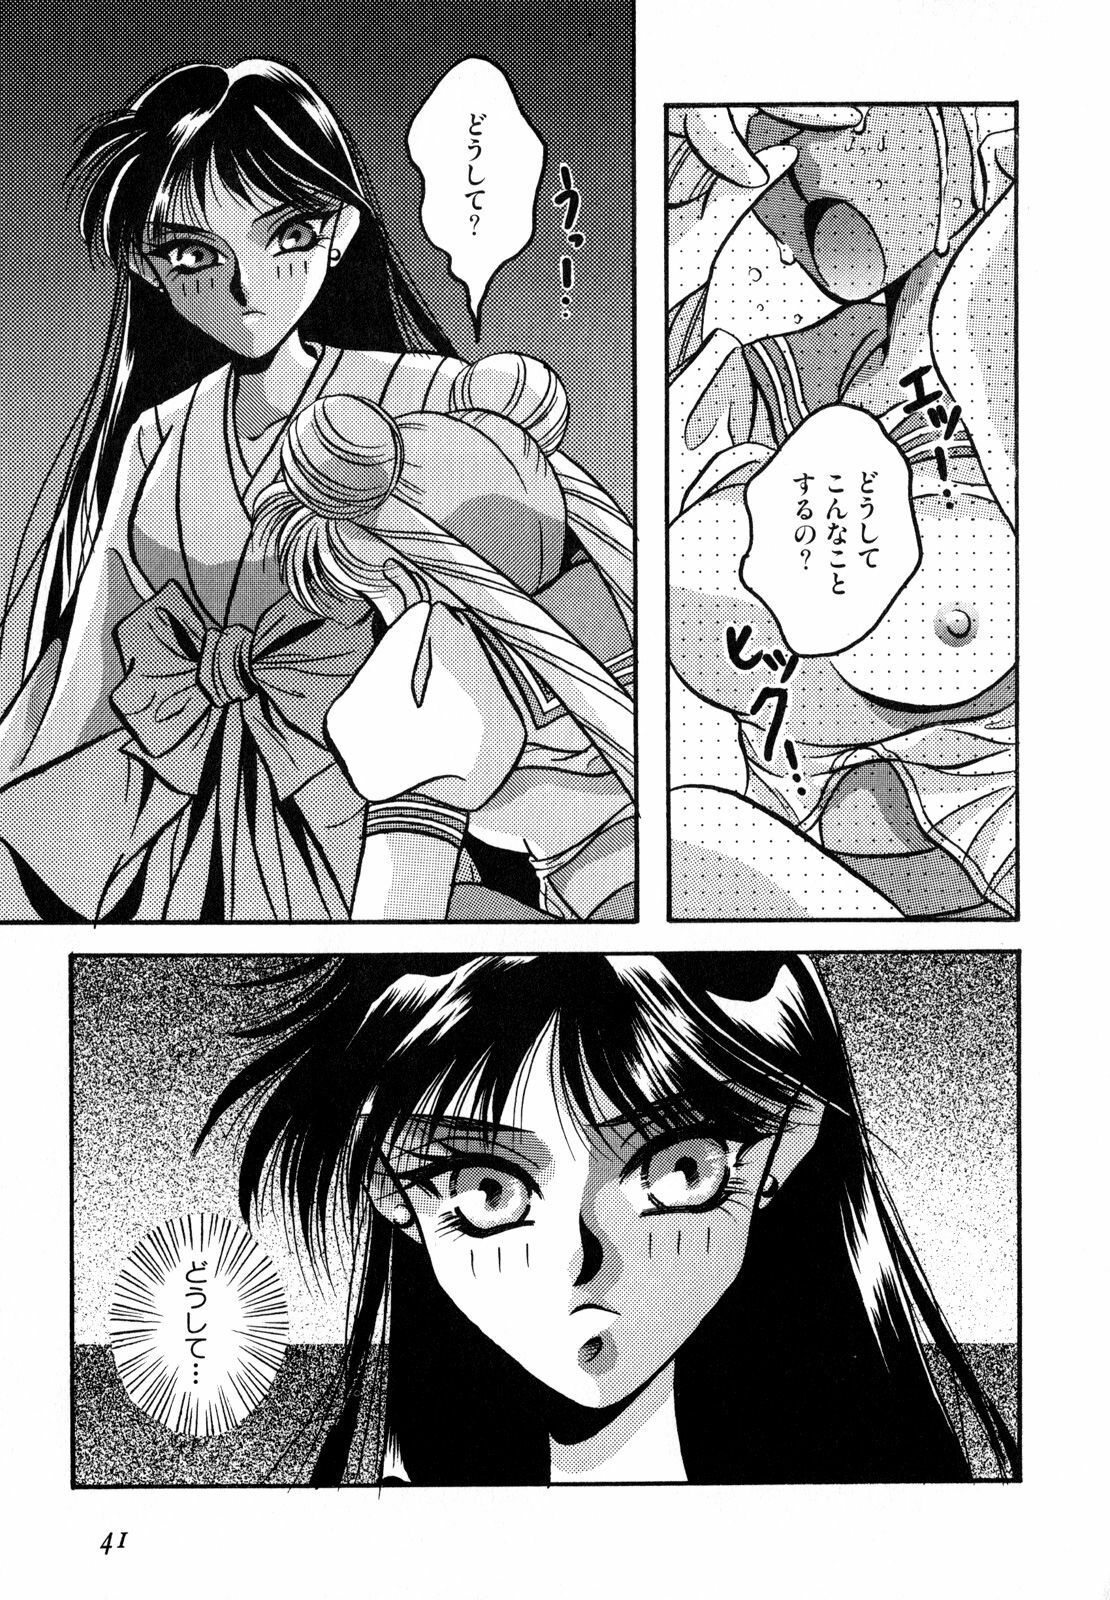 [Anthology] Lunatic Party 2 (Sailor Moon) page 42 full